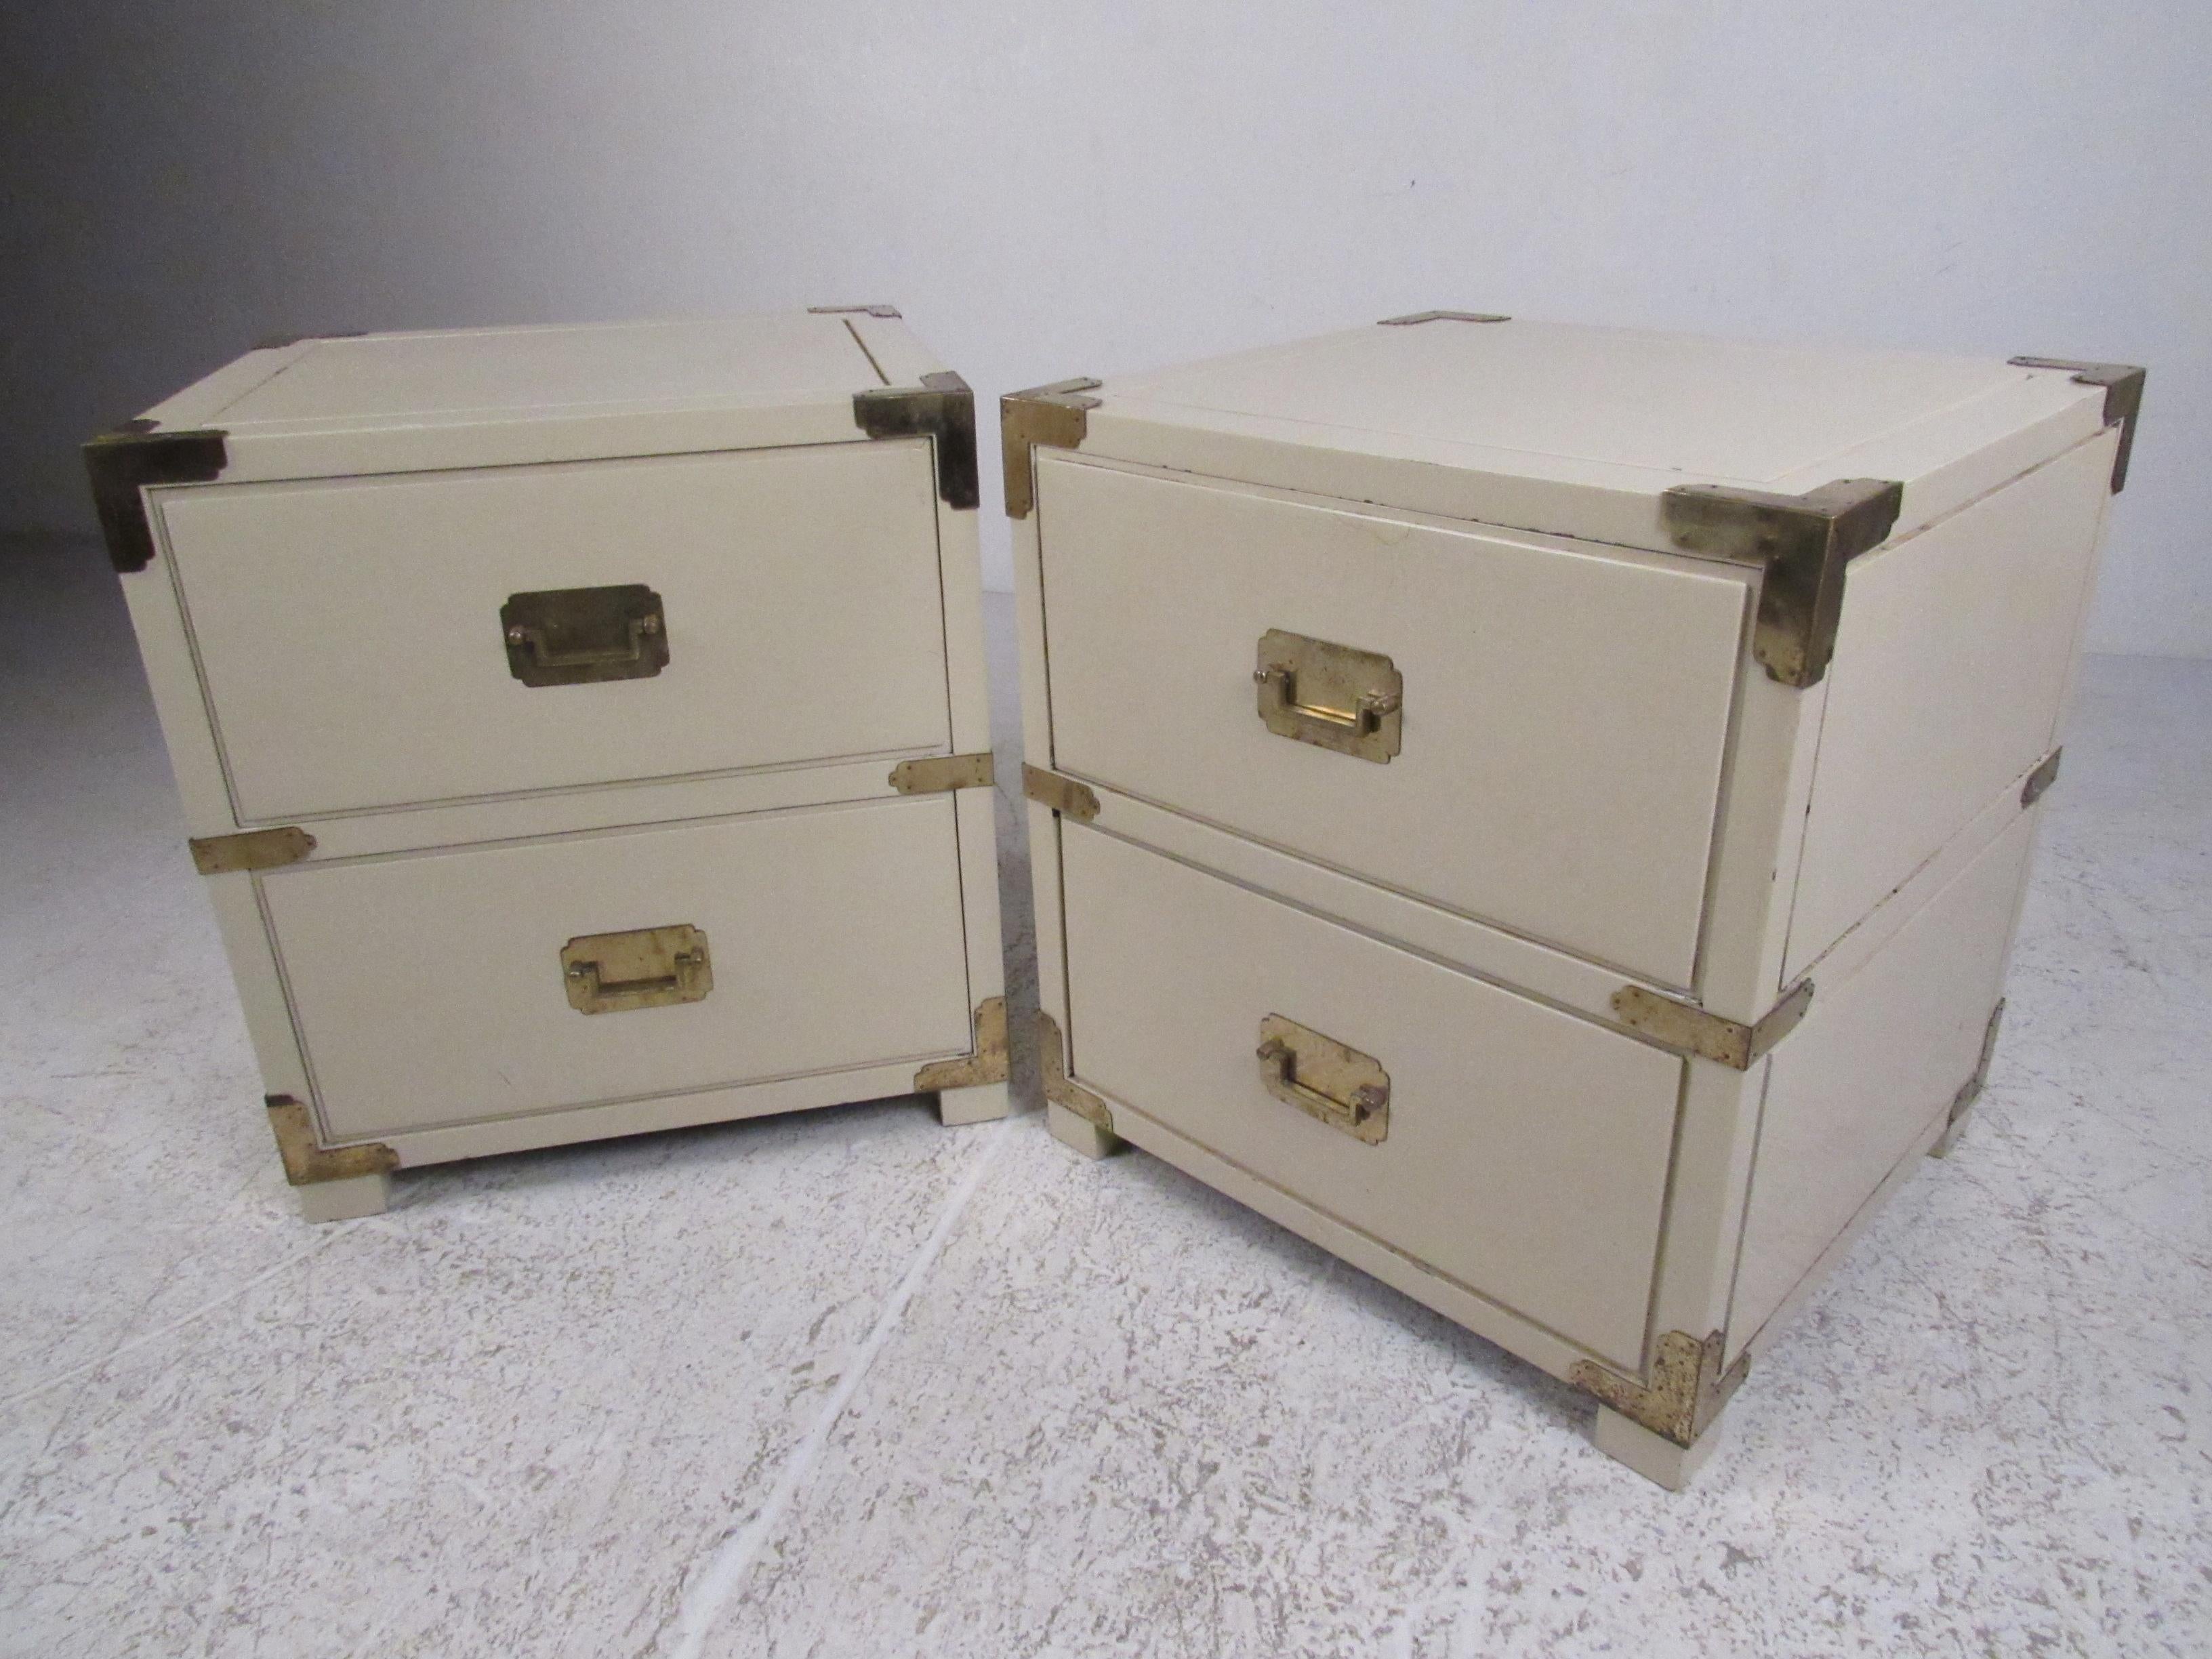 Attractive pair of crème color two-drawer Campaign style cabinets with brass hardware and finished backs. Perfect for use in a nightstand or end table application. Please confirm item location (NY or NJ) with dealer.